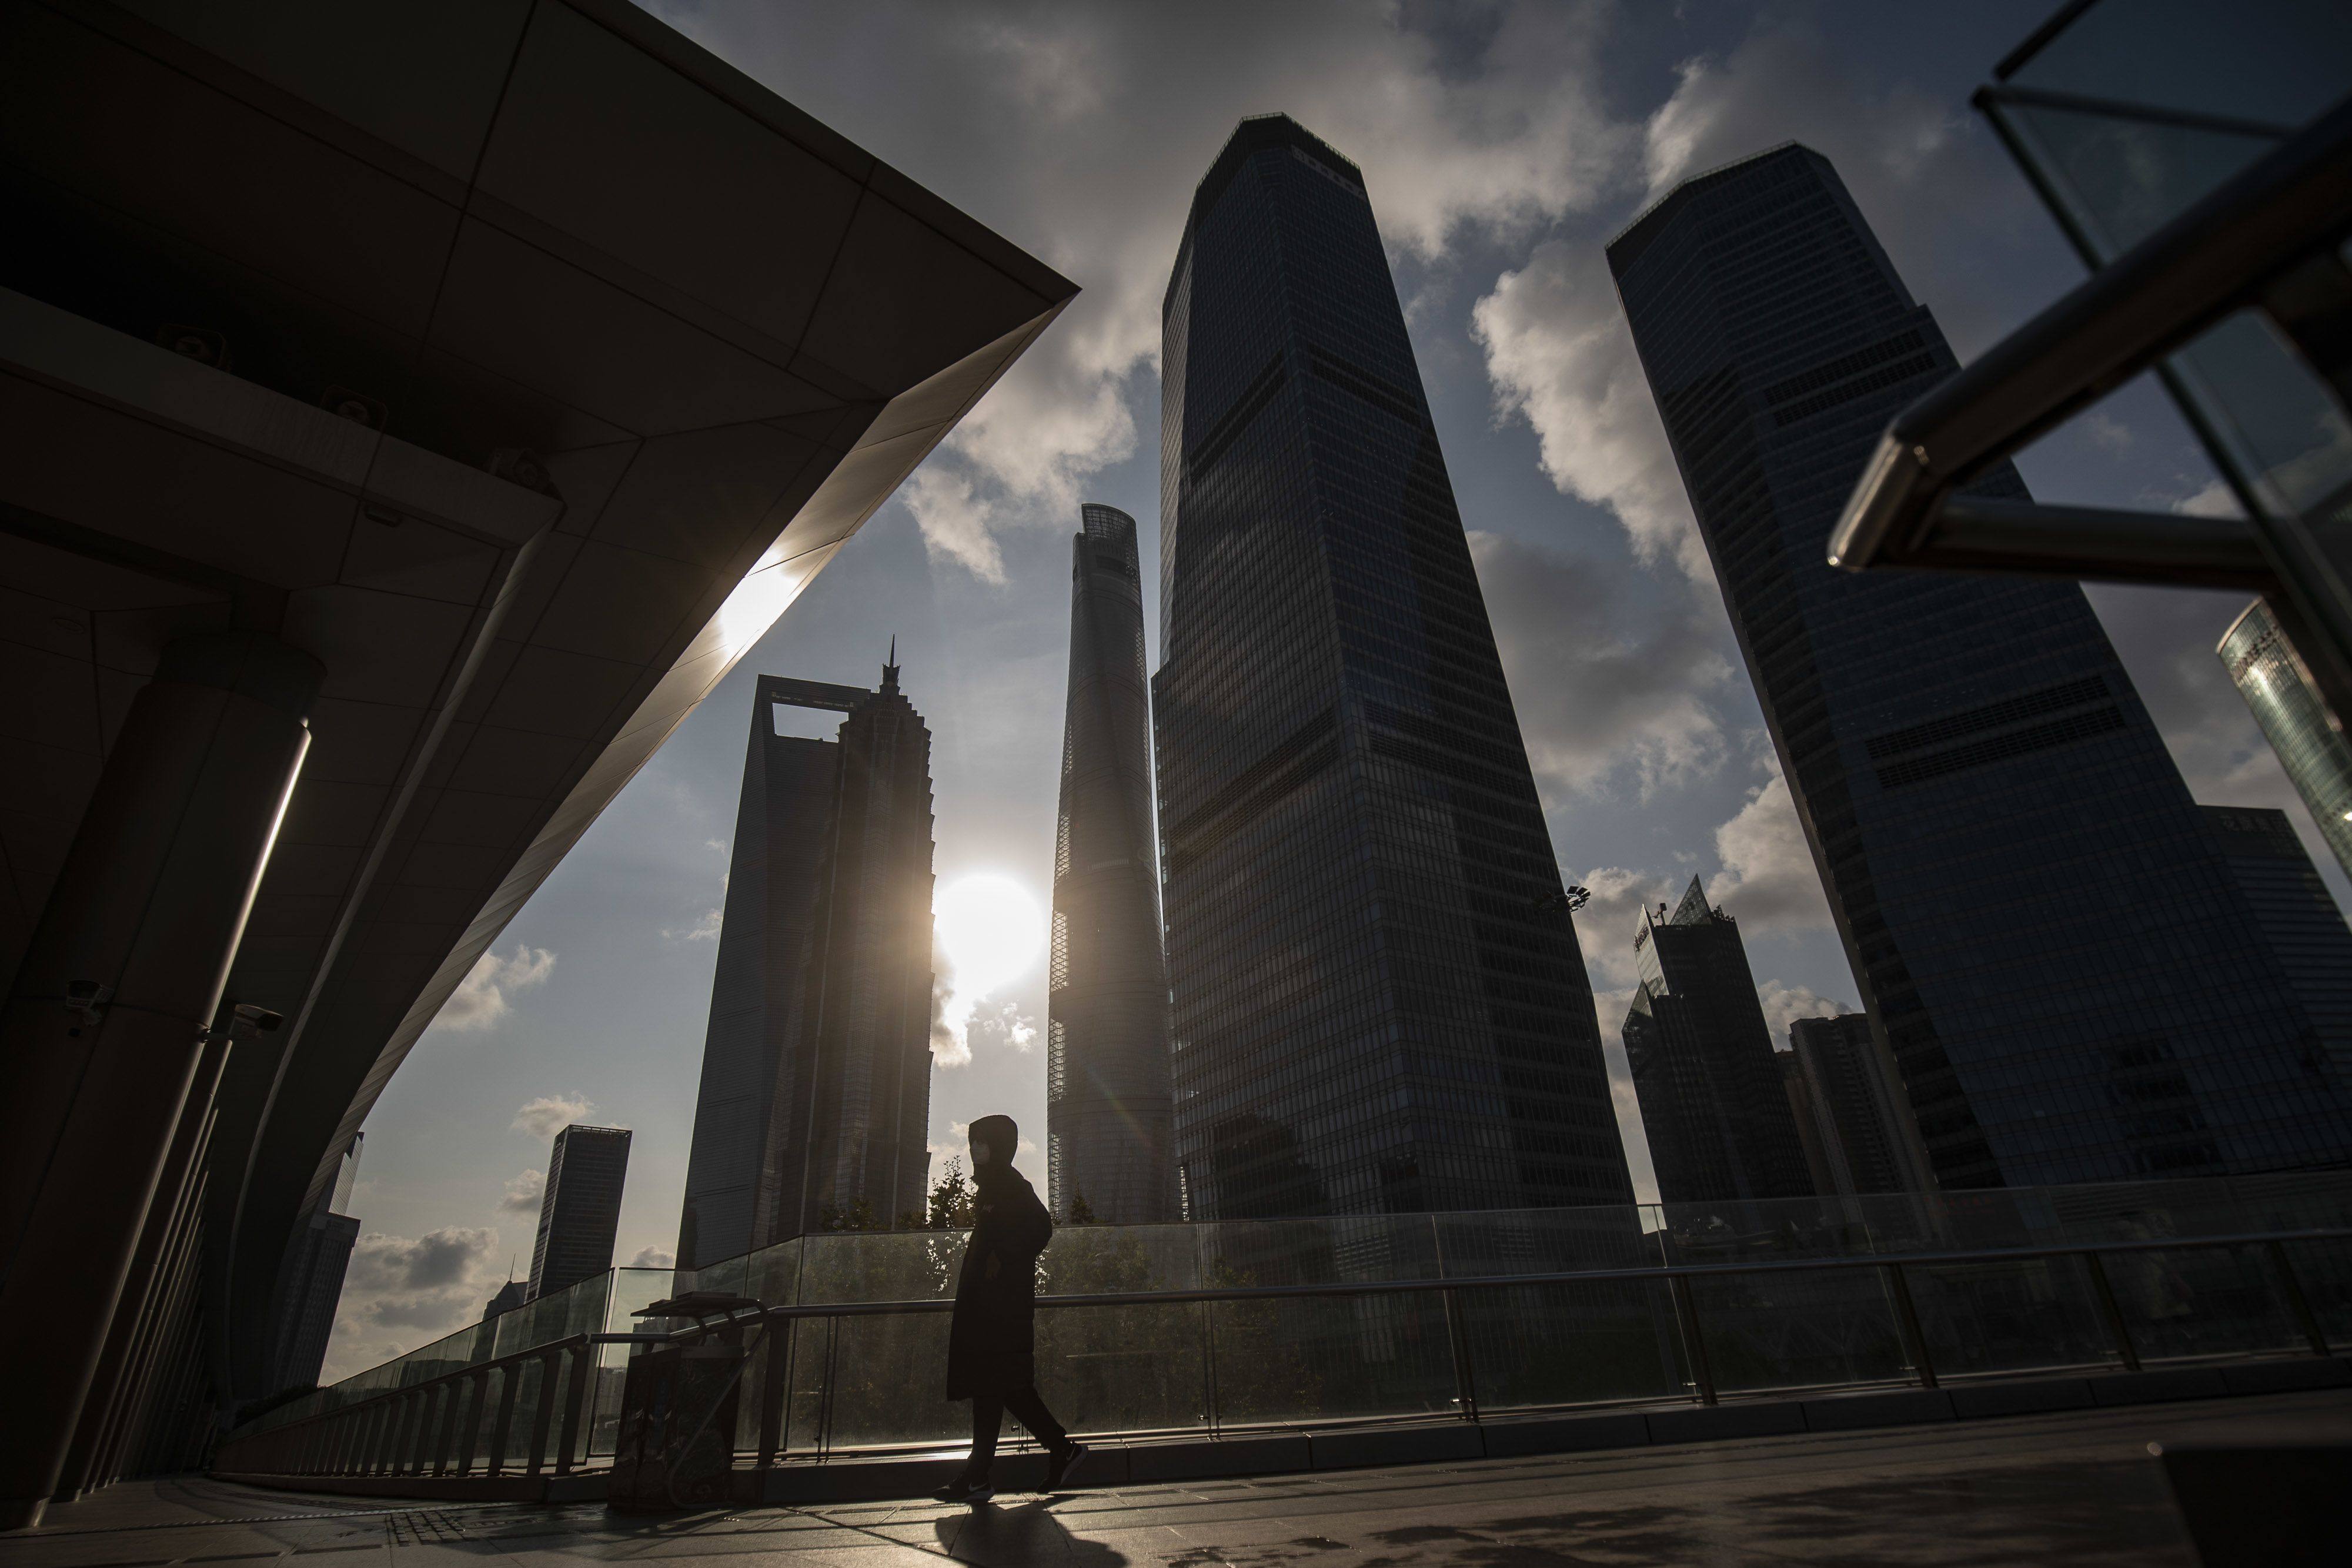 Shanghai (pictured) has 66 “unicorn” companies - unlisted firms valued at more than US$1 billion. Photo: Bloomberg